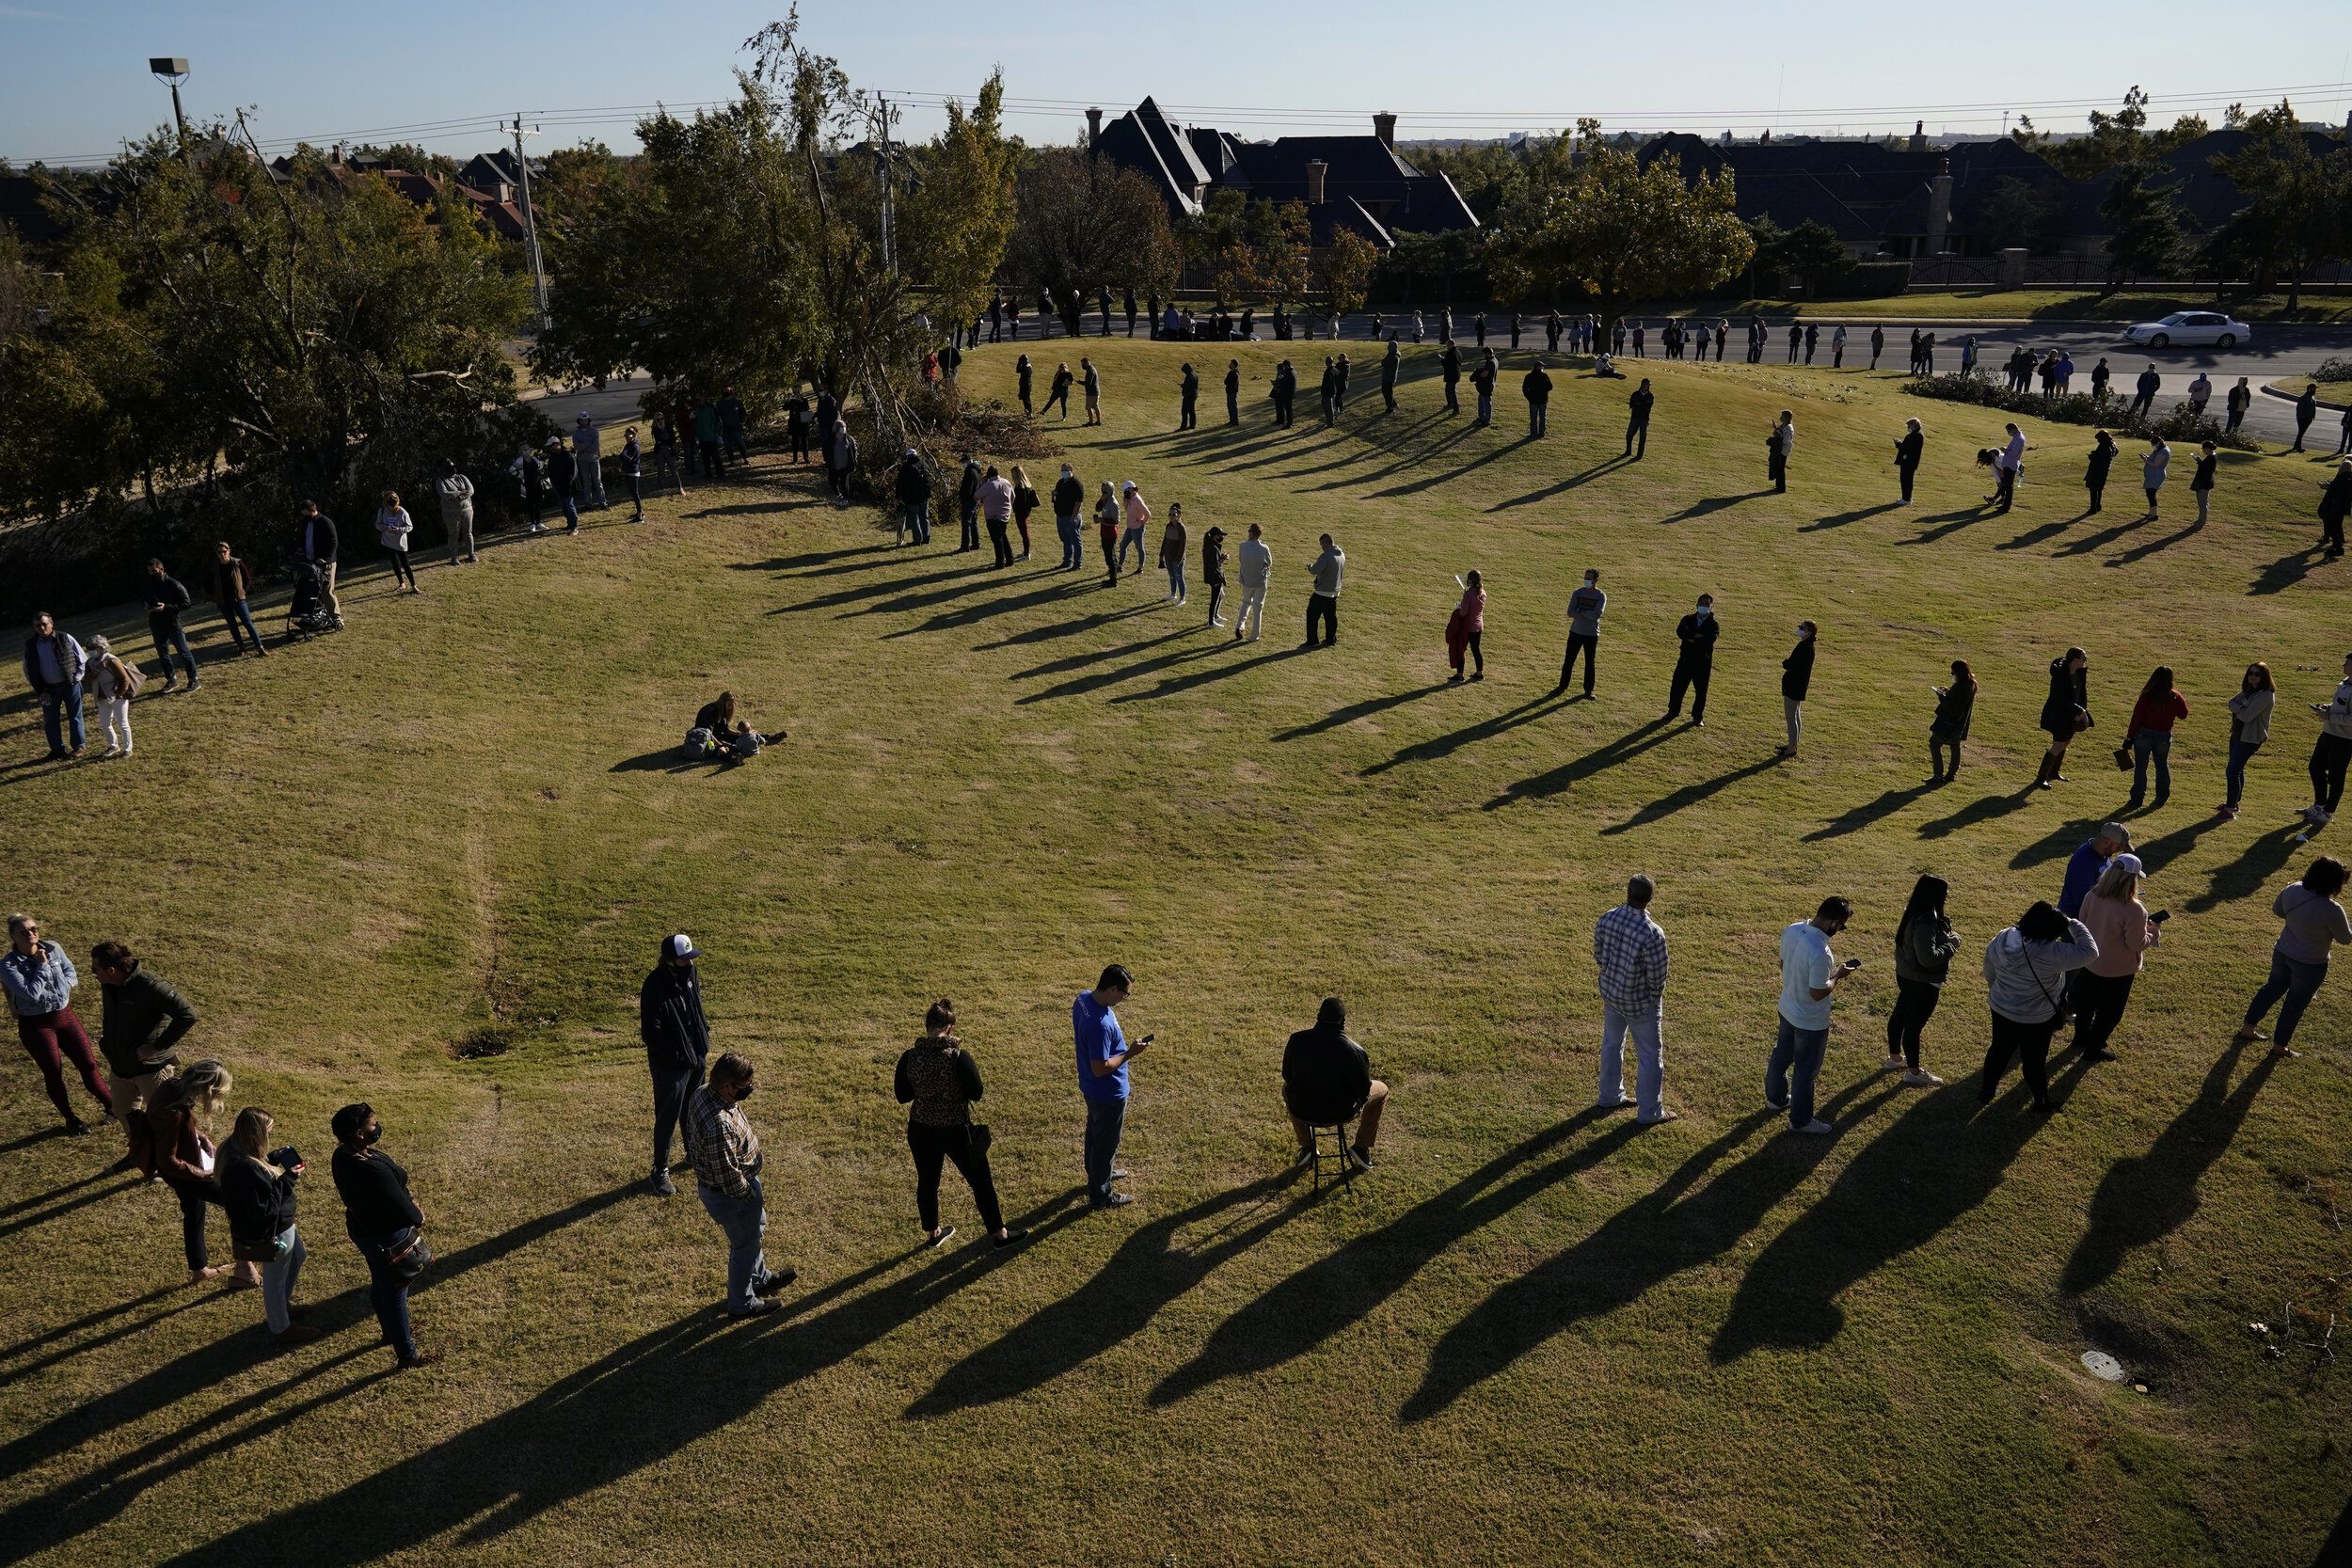  Voters wait in a long line to cast their ballots at Church of the Servant in Oklahoma City on November 3, 2020. Nick Oxford/Reuters 